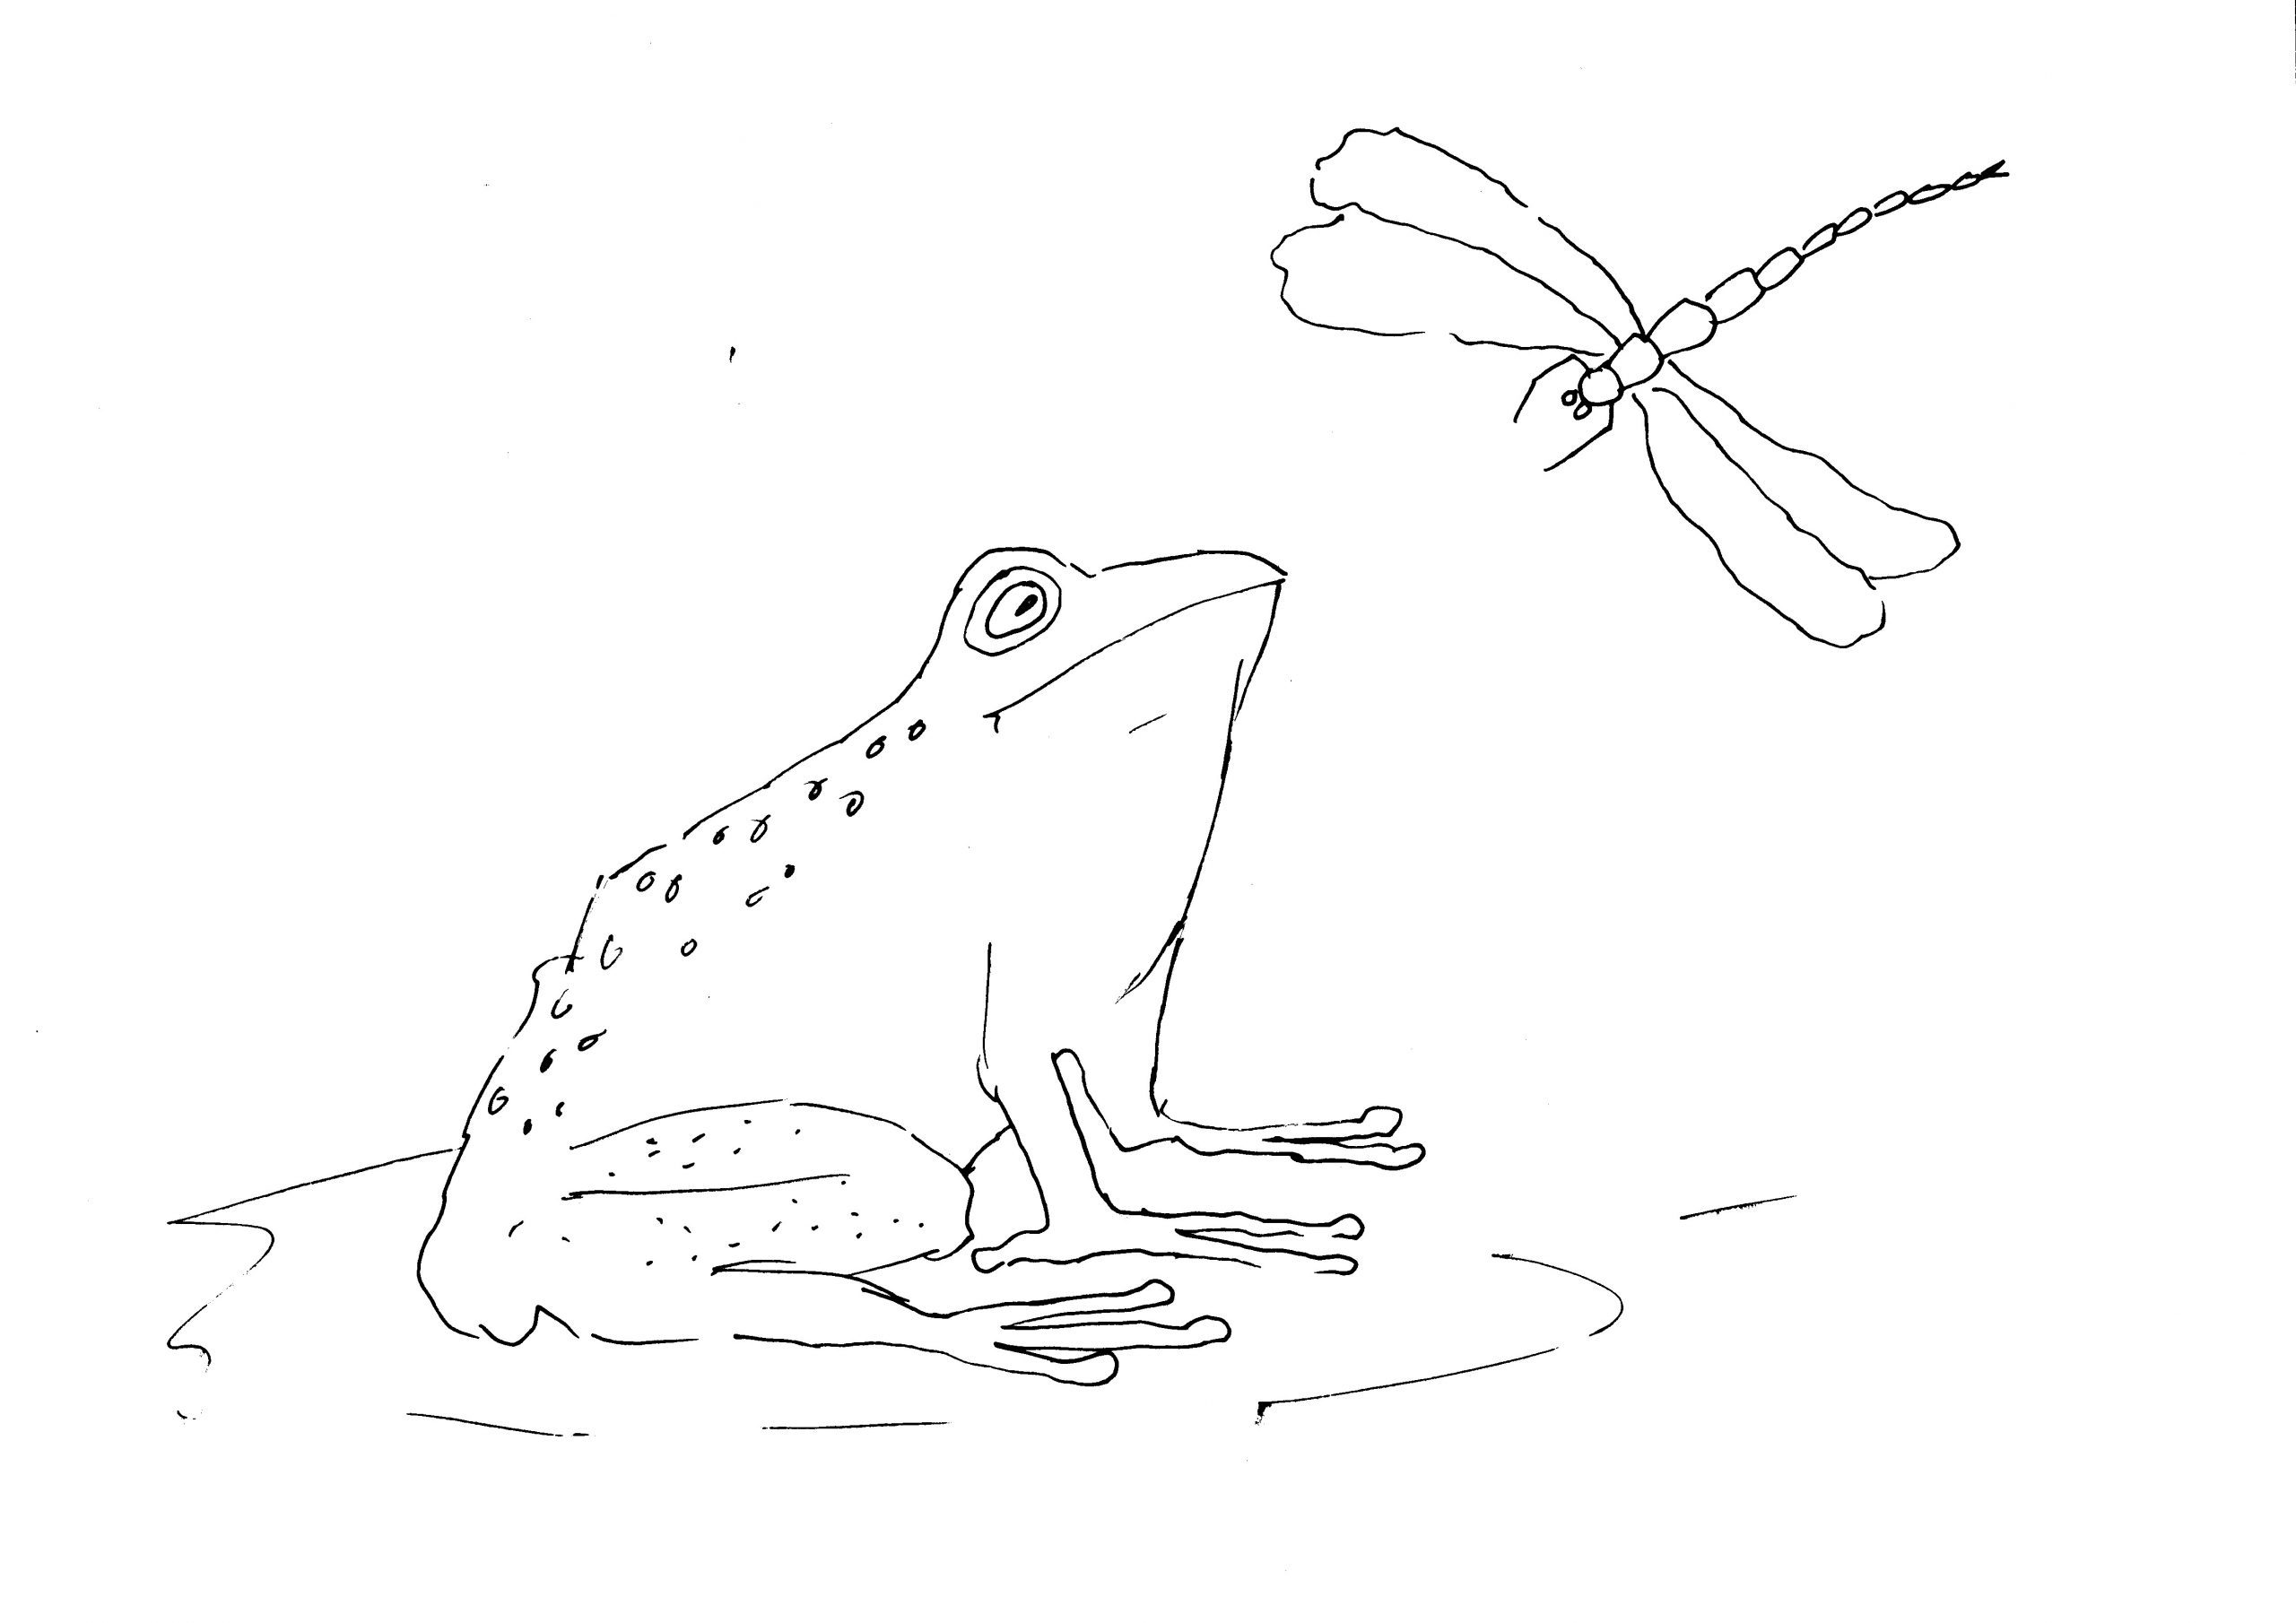 Learn How to DRAW a Tree Frog - ART with Albright presents Keep Drawing